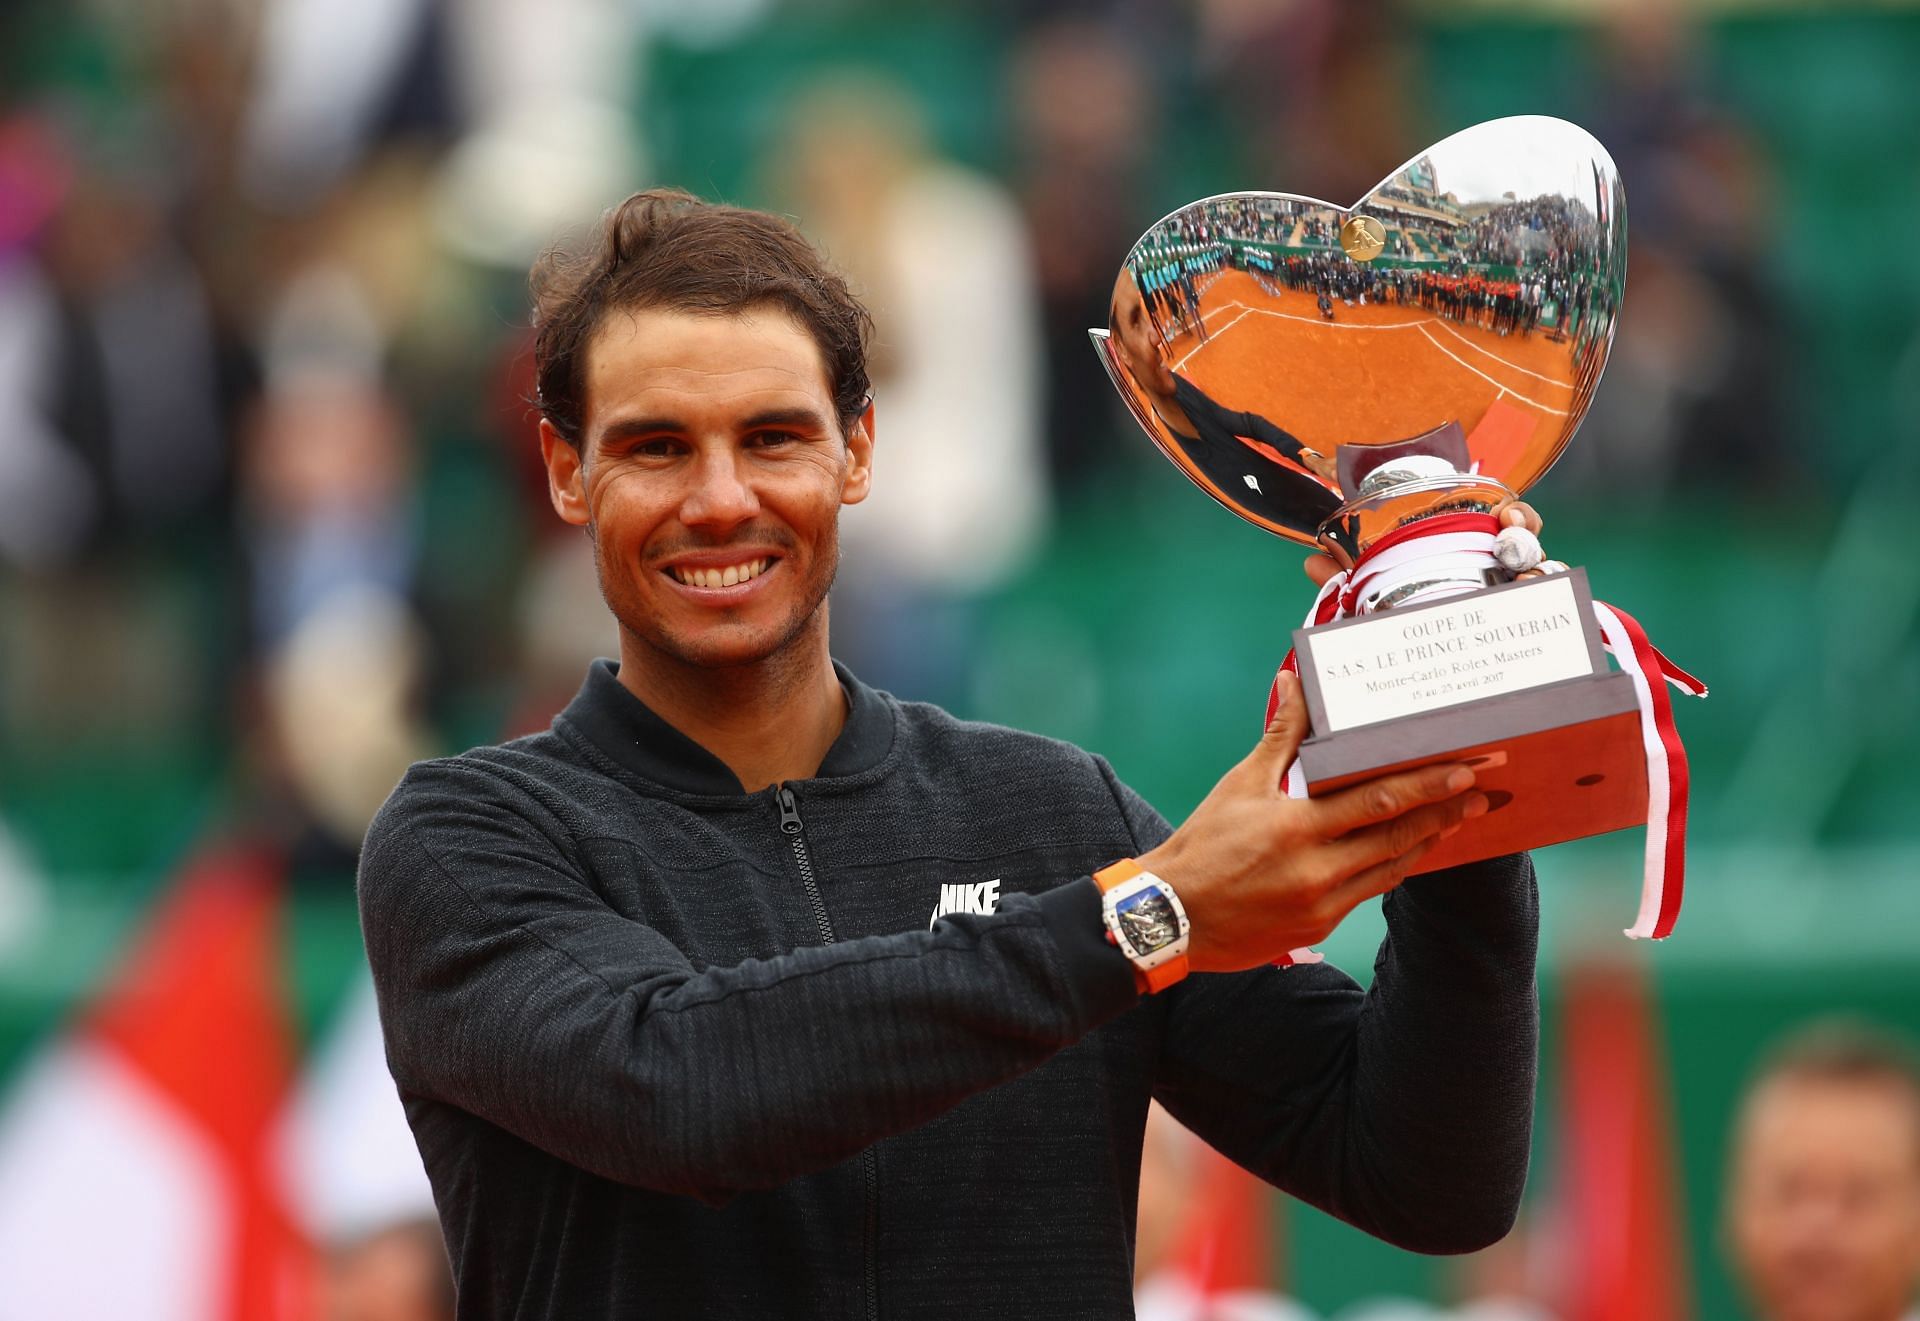 Rafal Nadal clinched the 2017 Monte-Carlo Rolex Masters title.